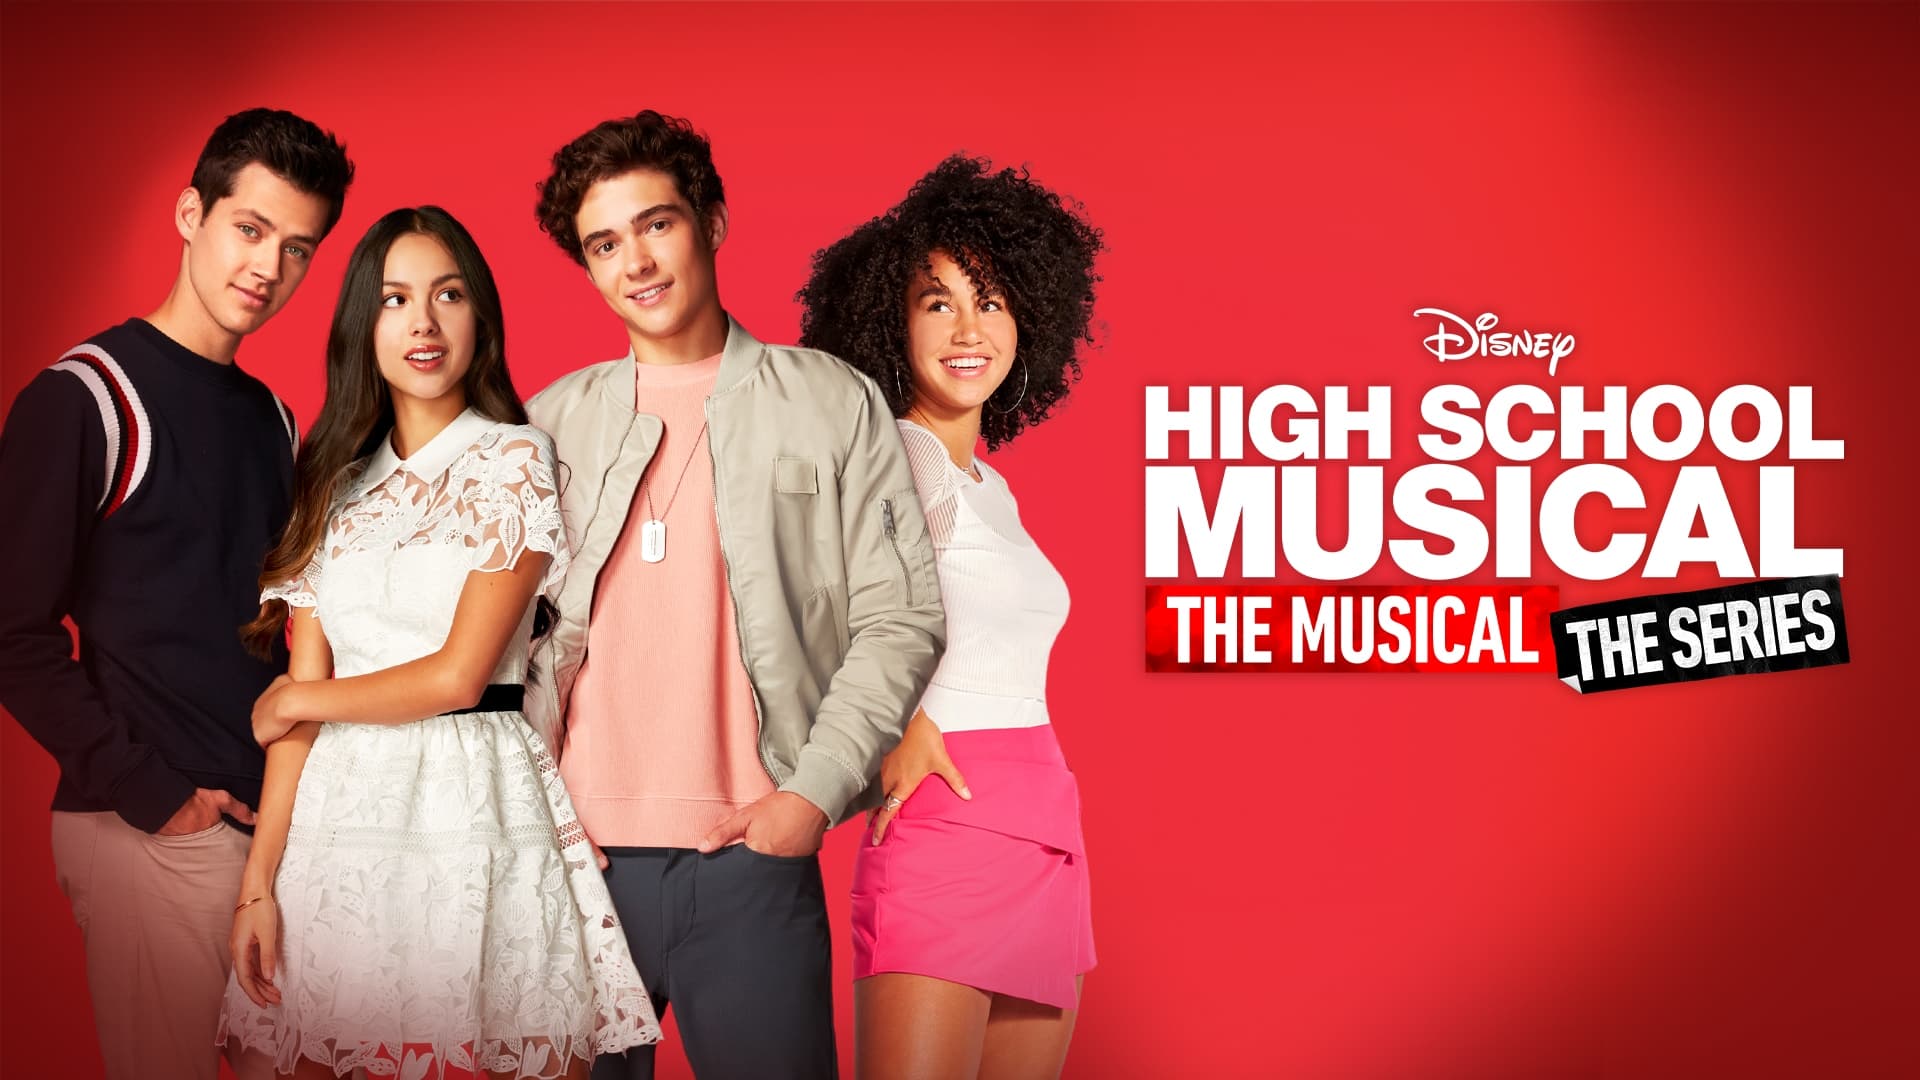 Serie Tv High School Musical: The Musical, 3° stagione